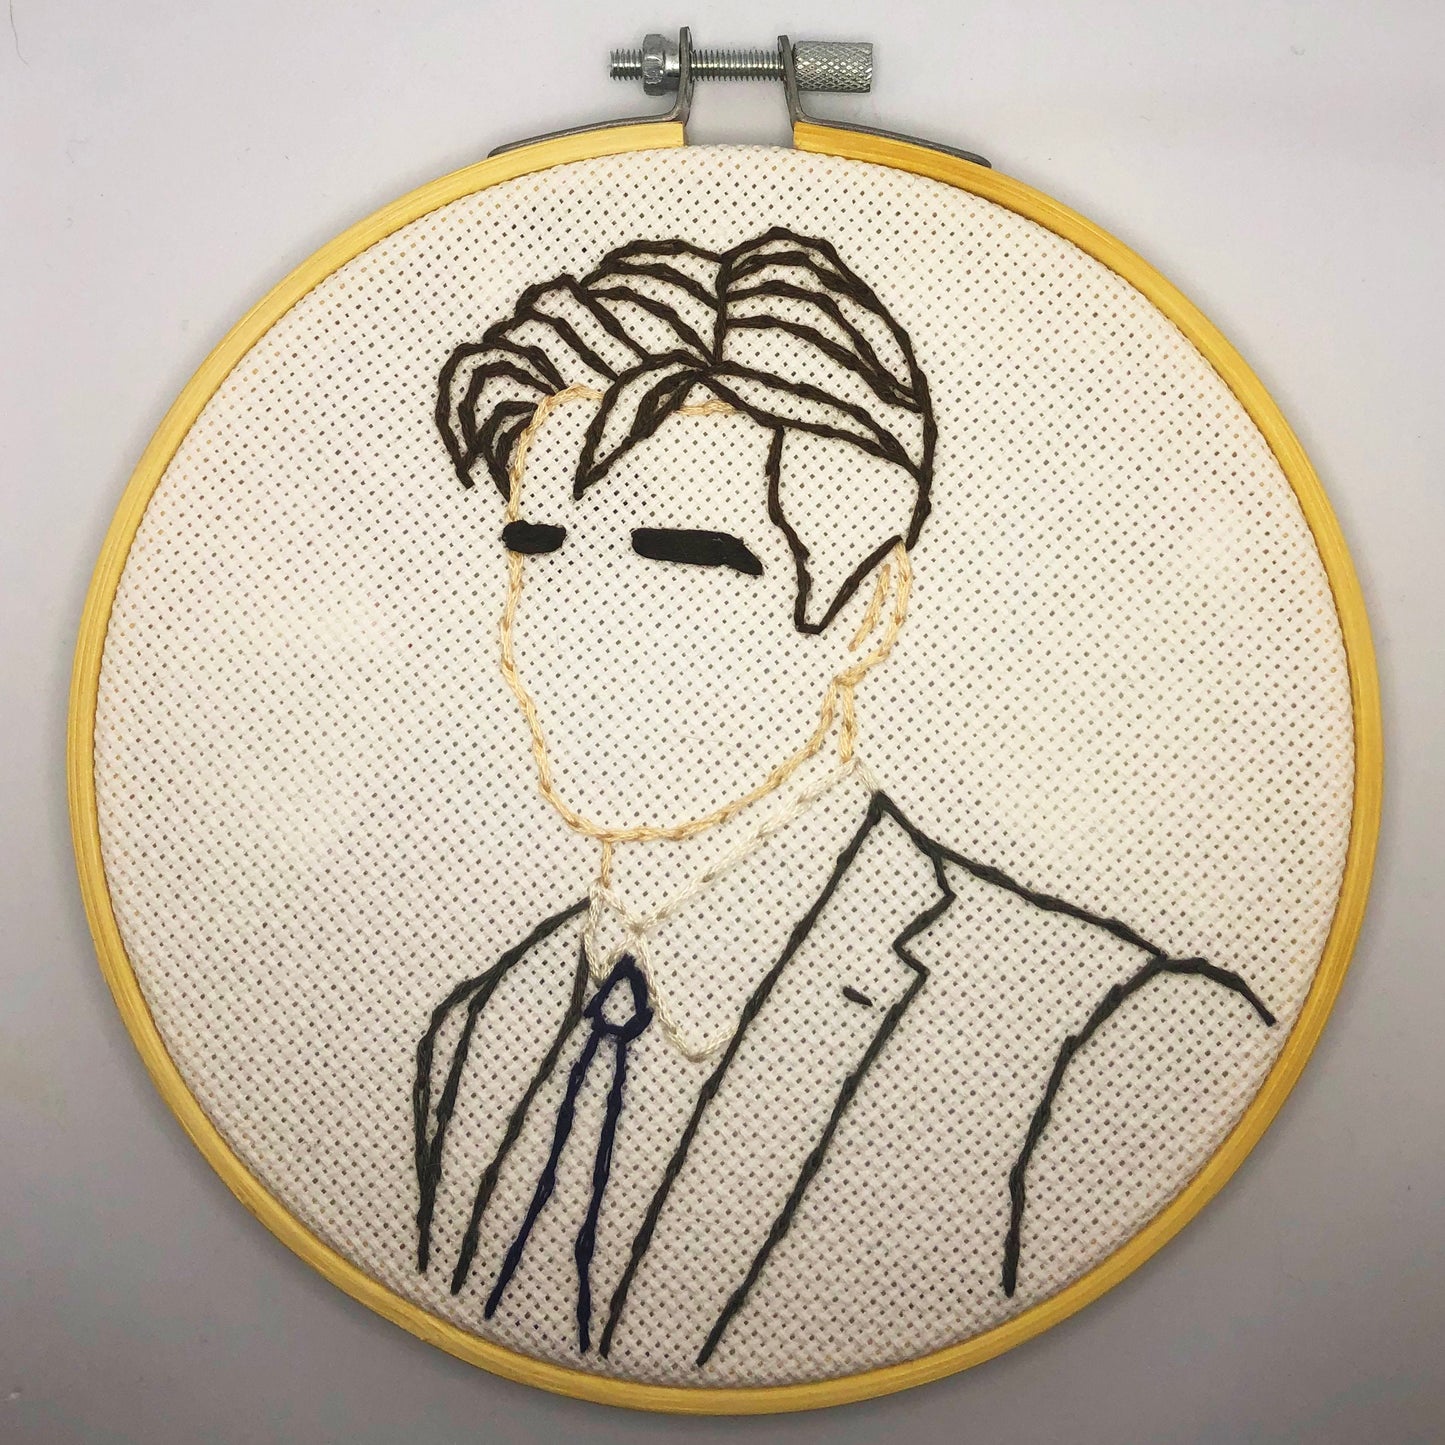 The X Files embroidery